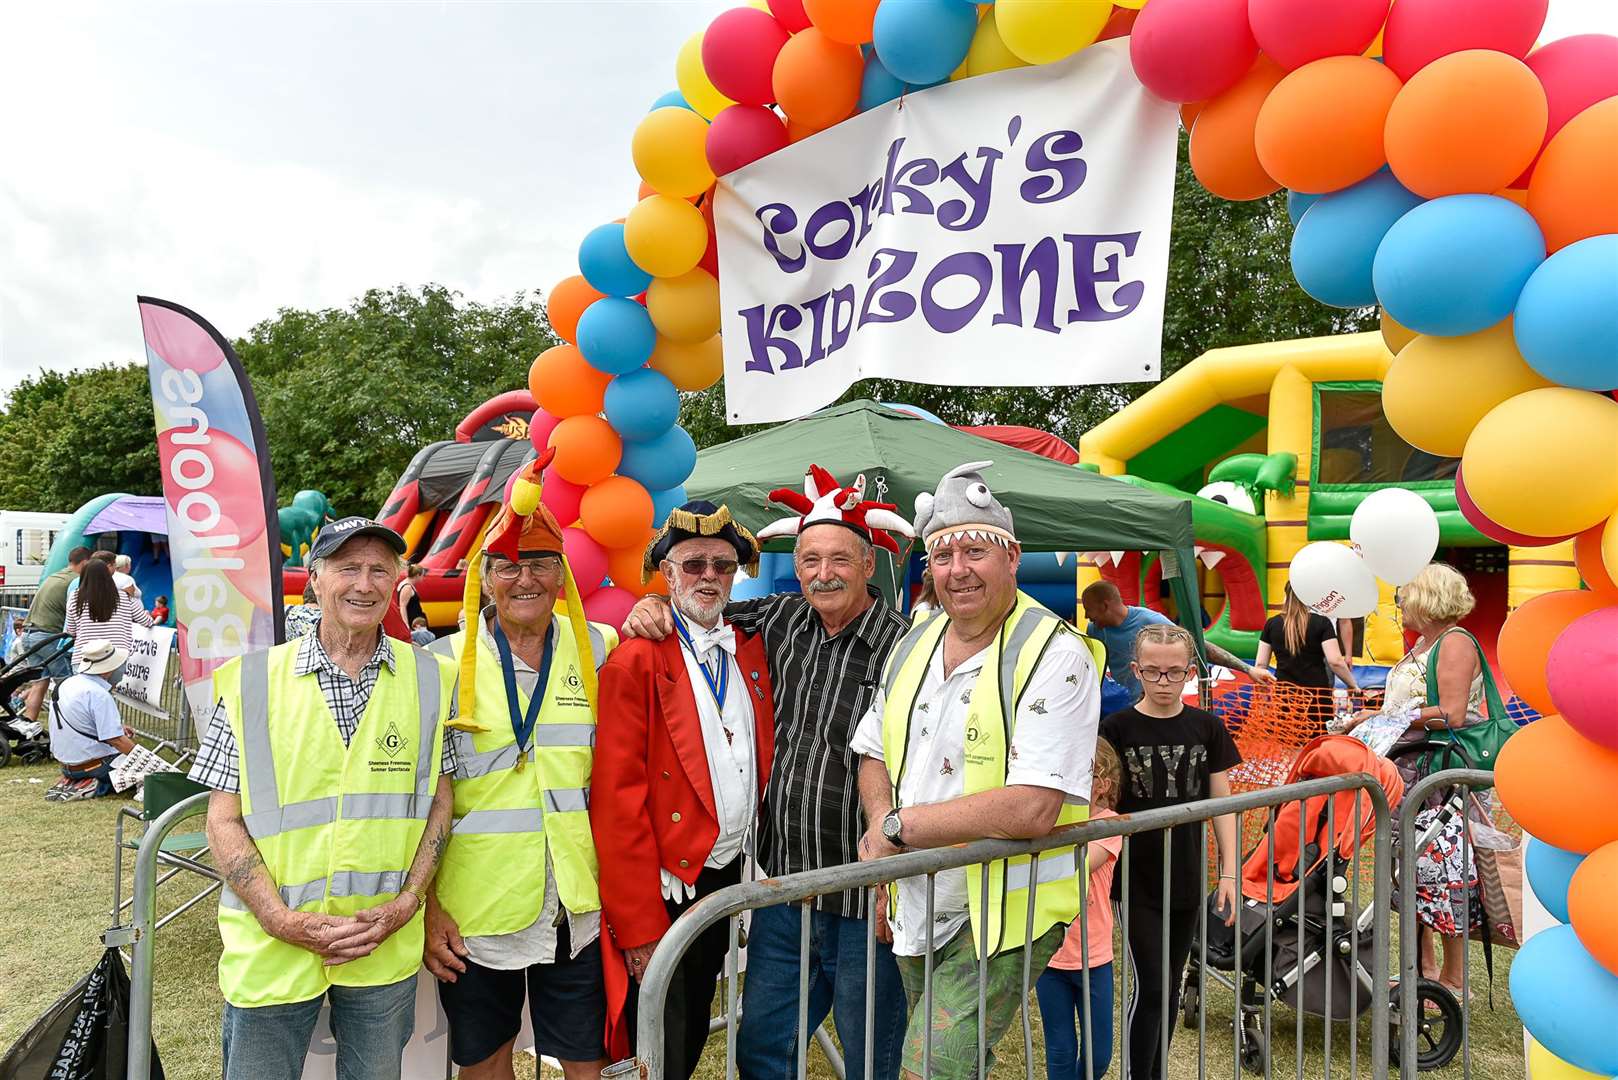 Fraser Gregory, Trevor Moss, Paul Day, John Mansfield and Barry Barnes, part of the Sheerness Cork Lodge raising money on the inflatables for Smile Chain, a cleft palate charity, and Demelza House at the Sheppey Summer Spectacular. Picture: Tony Jones (13768350)